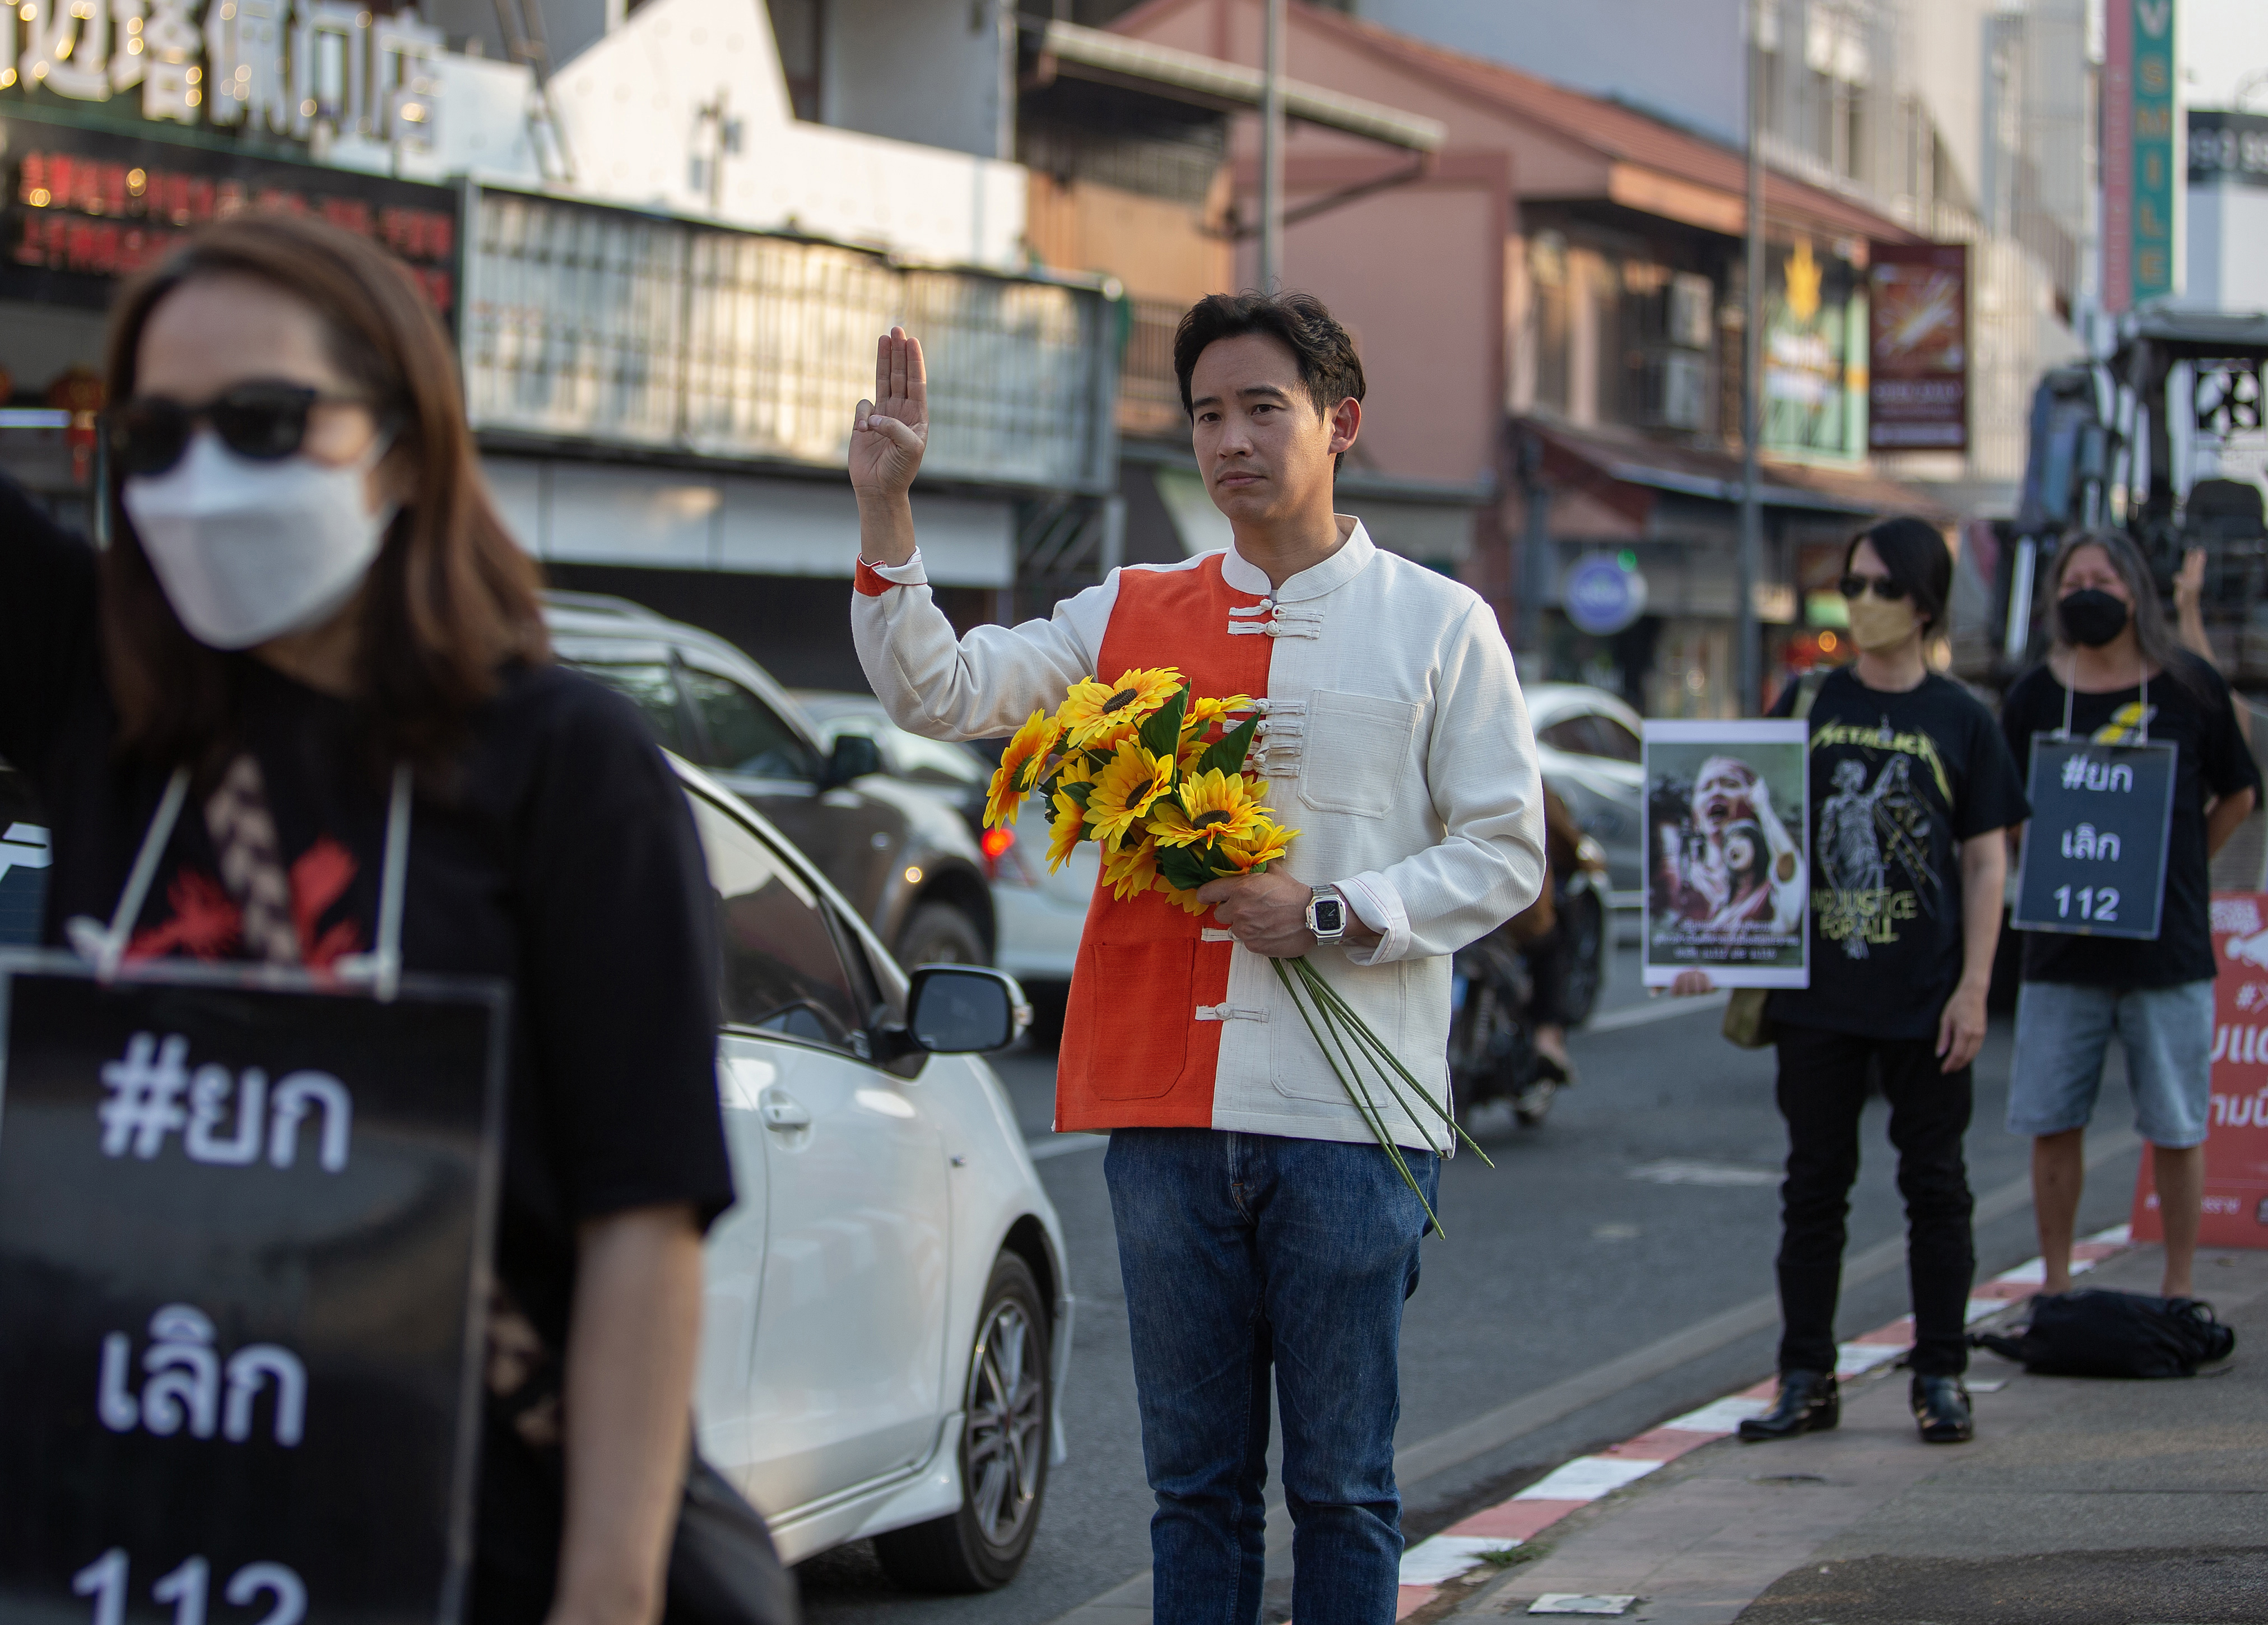 Pita joins a demonstration—demanding the release of two young pro-democracy activists who were detained for criticizing the monarchy—at Tha Phae Gate in Chiang Mai, Thailand, Feb. 4, 2023. (Pongmanat Tasiri—SOPA/LightRocket/Getty Images)